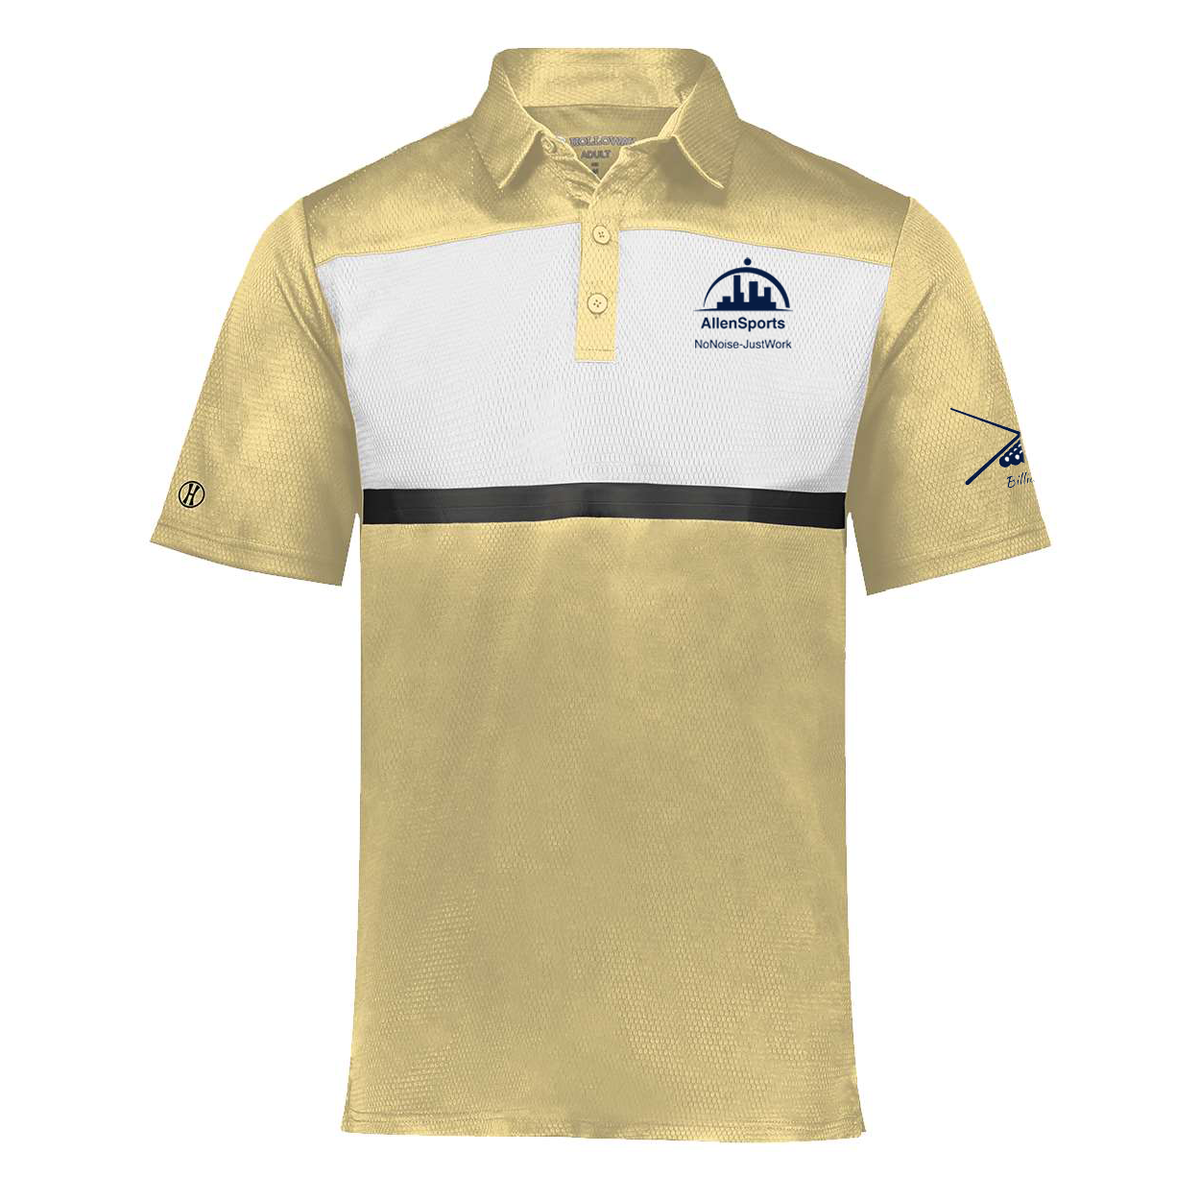 AllenSports Prism Bold Polo